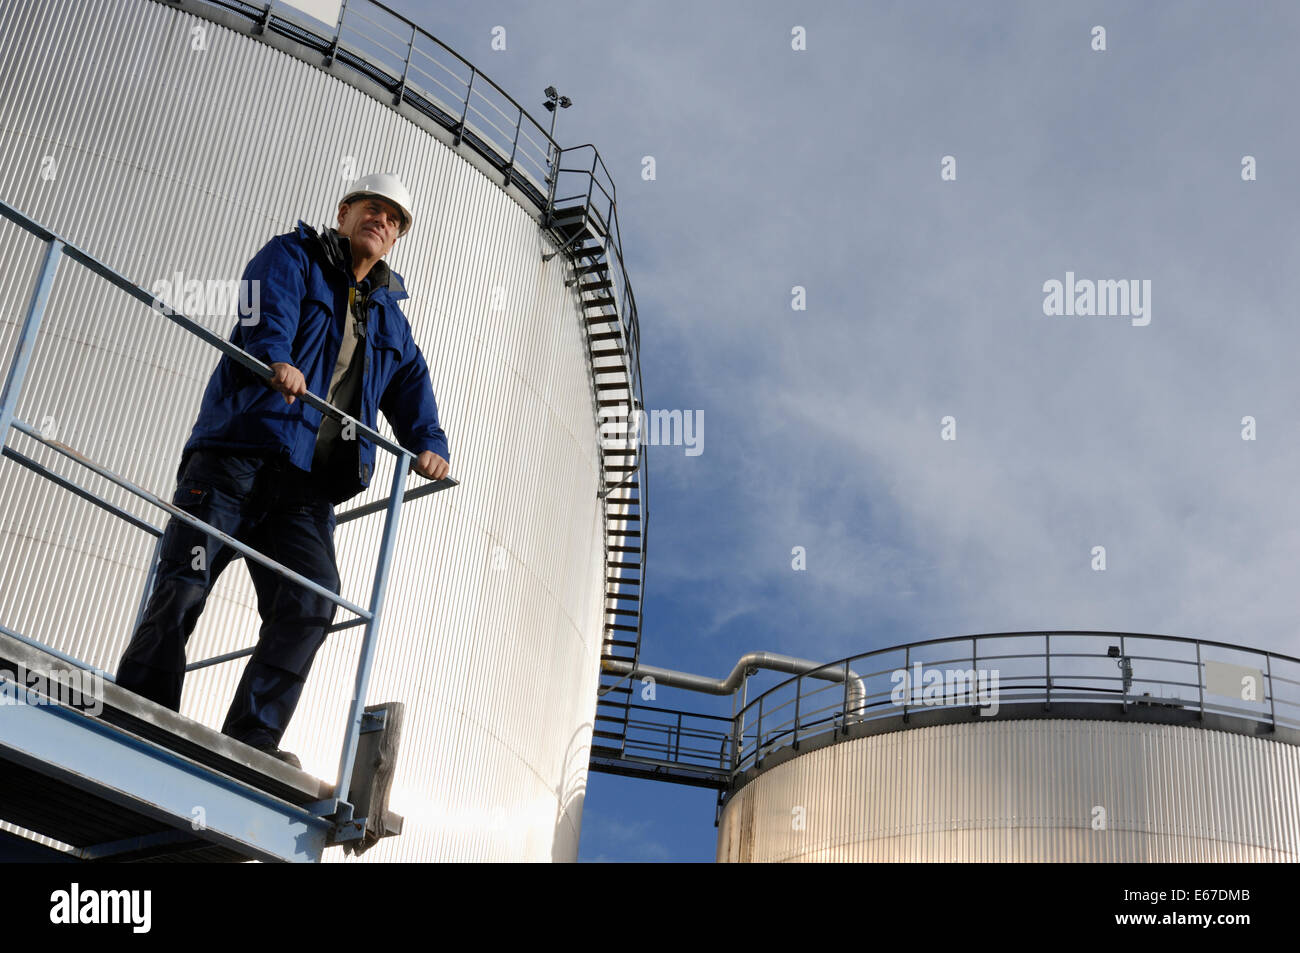 oil and gas worker with large fuel-storage tanks in background Stock Photo